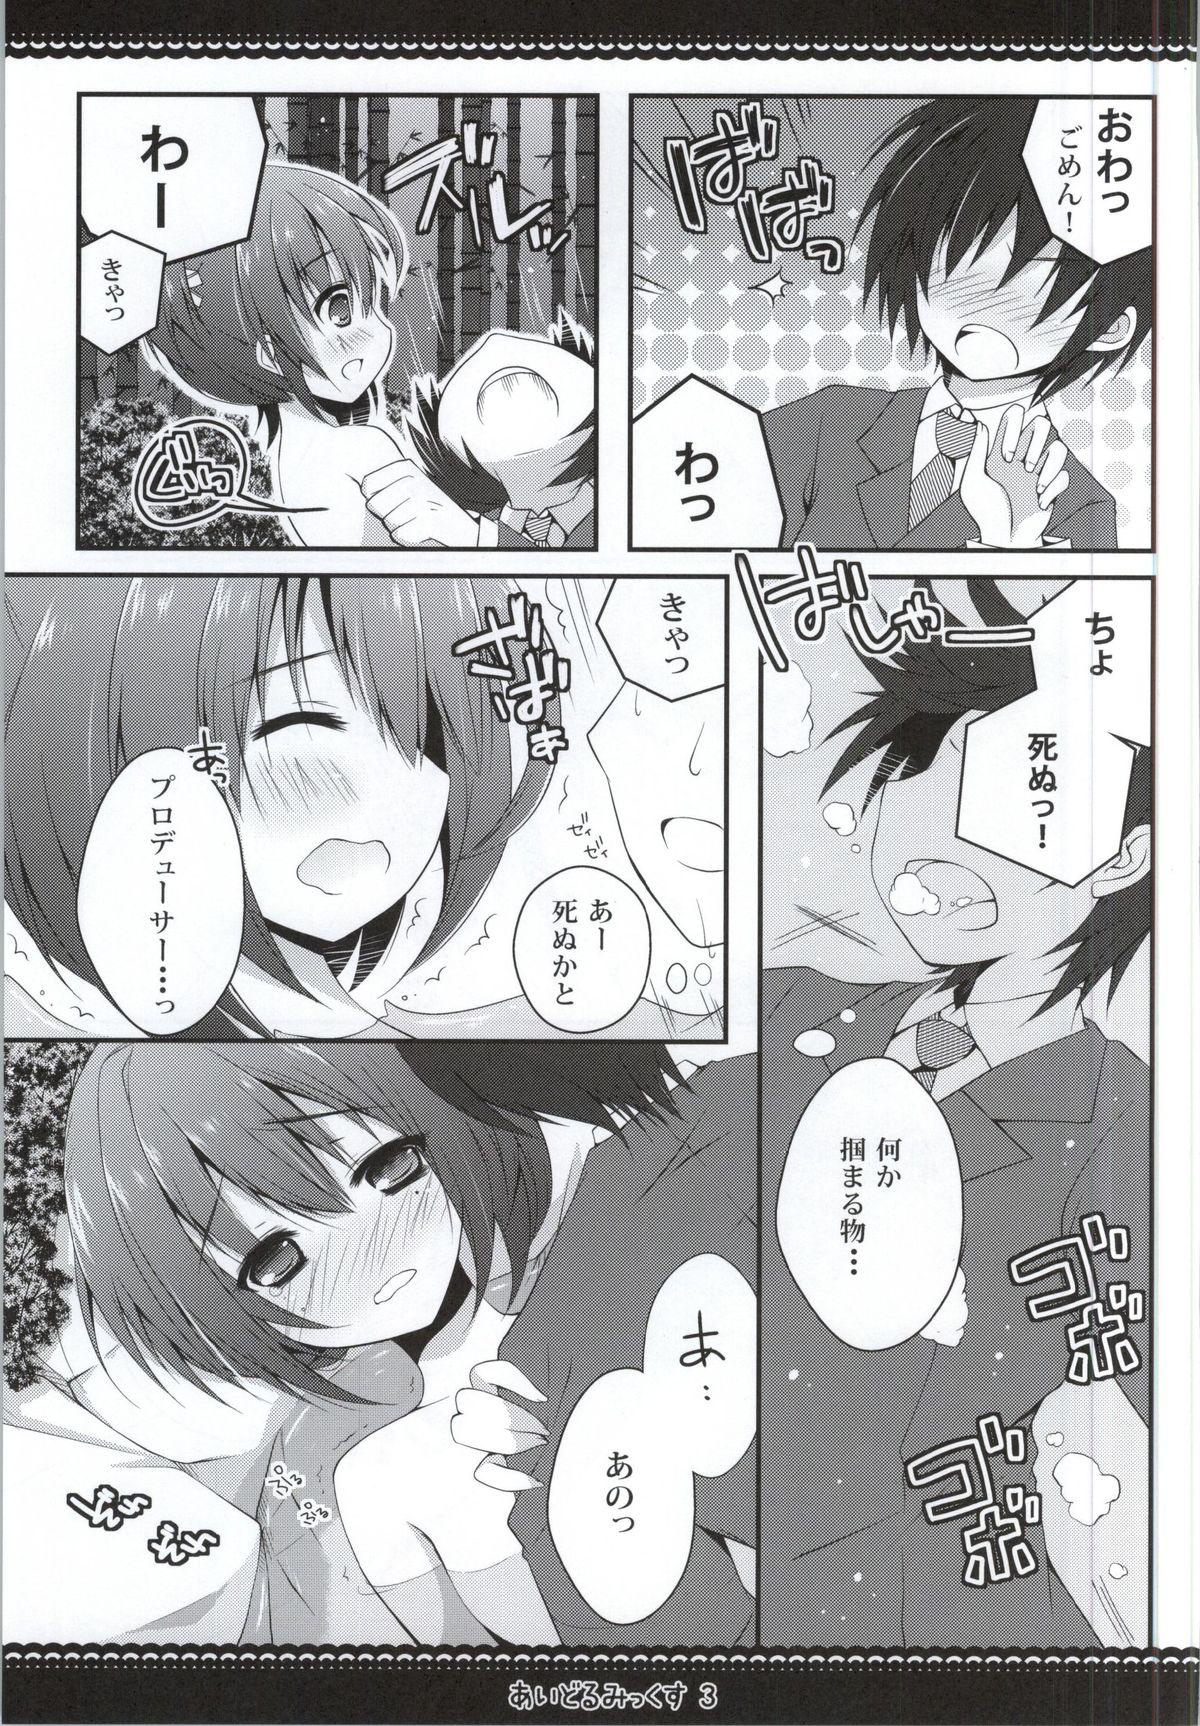 Gay Idolmix 3 - The idolmaster Tease - Page 8